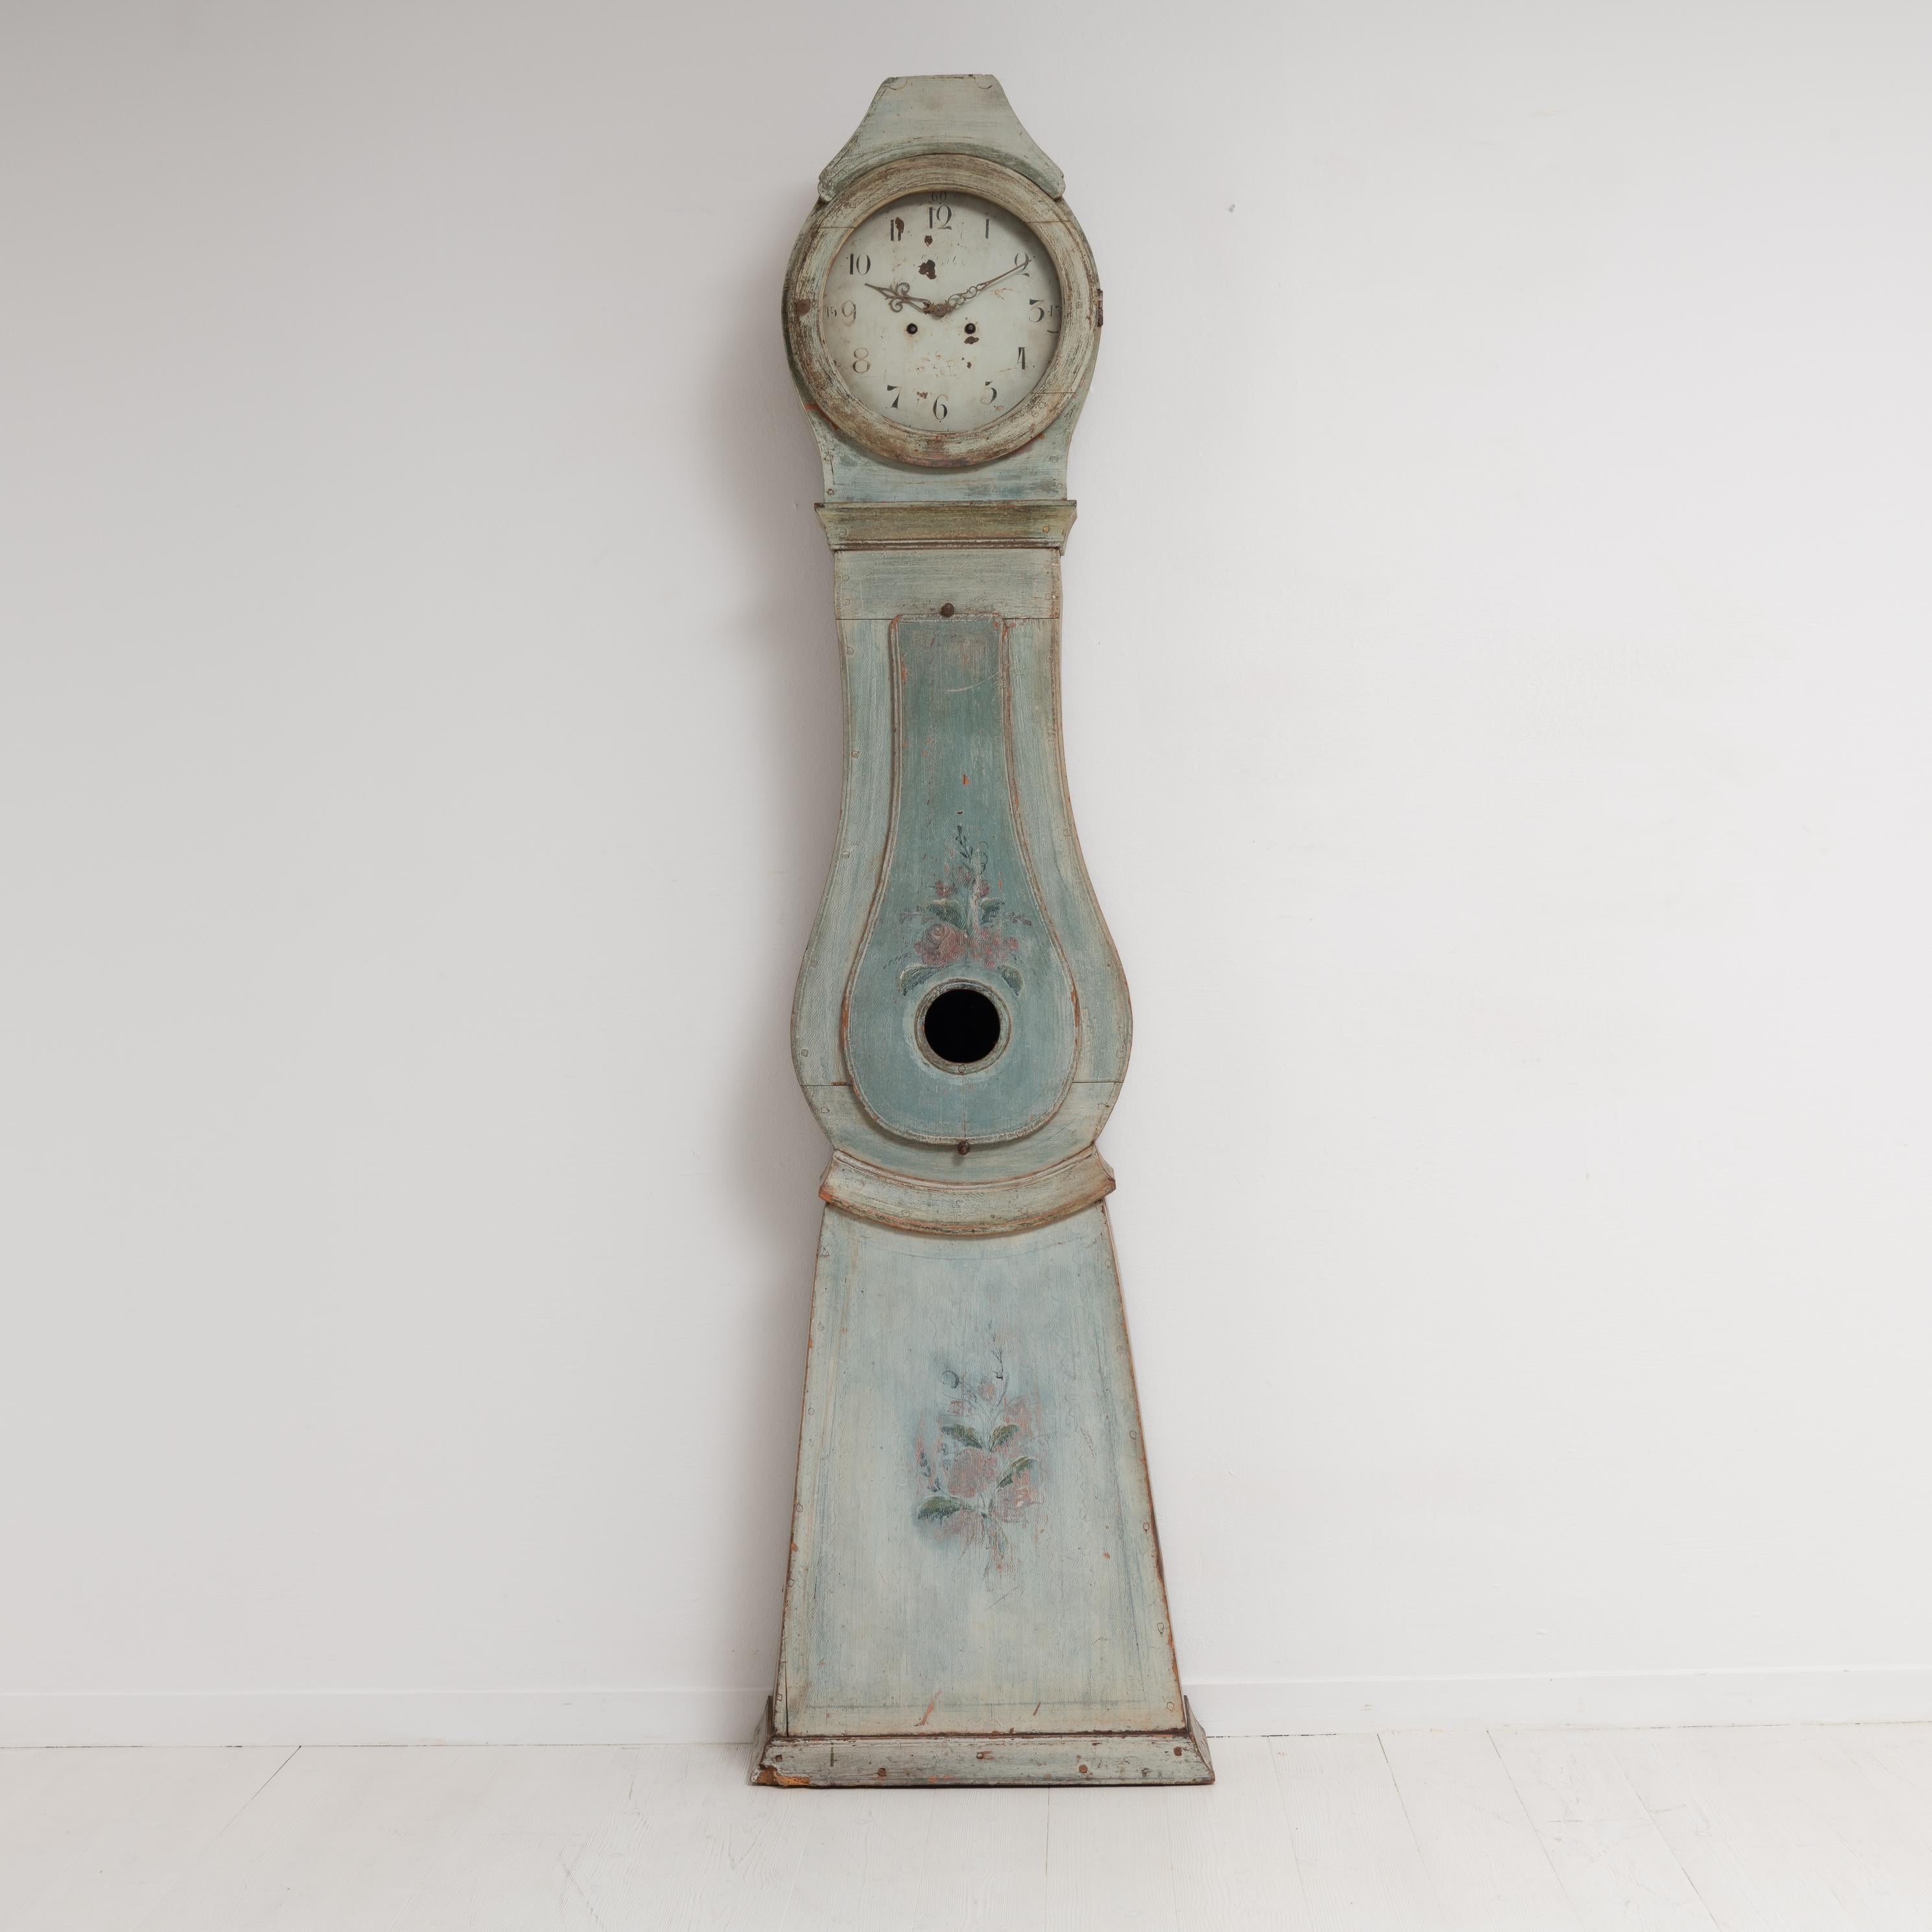 Swedish long case clock from the area Dalarna. Made around 1820 to 1830 with a classic curved rococo shape. The case is unusually charming with the distressed paint. The original paint from the 1820s shines through the later paint from the late